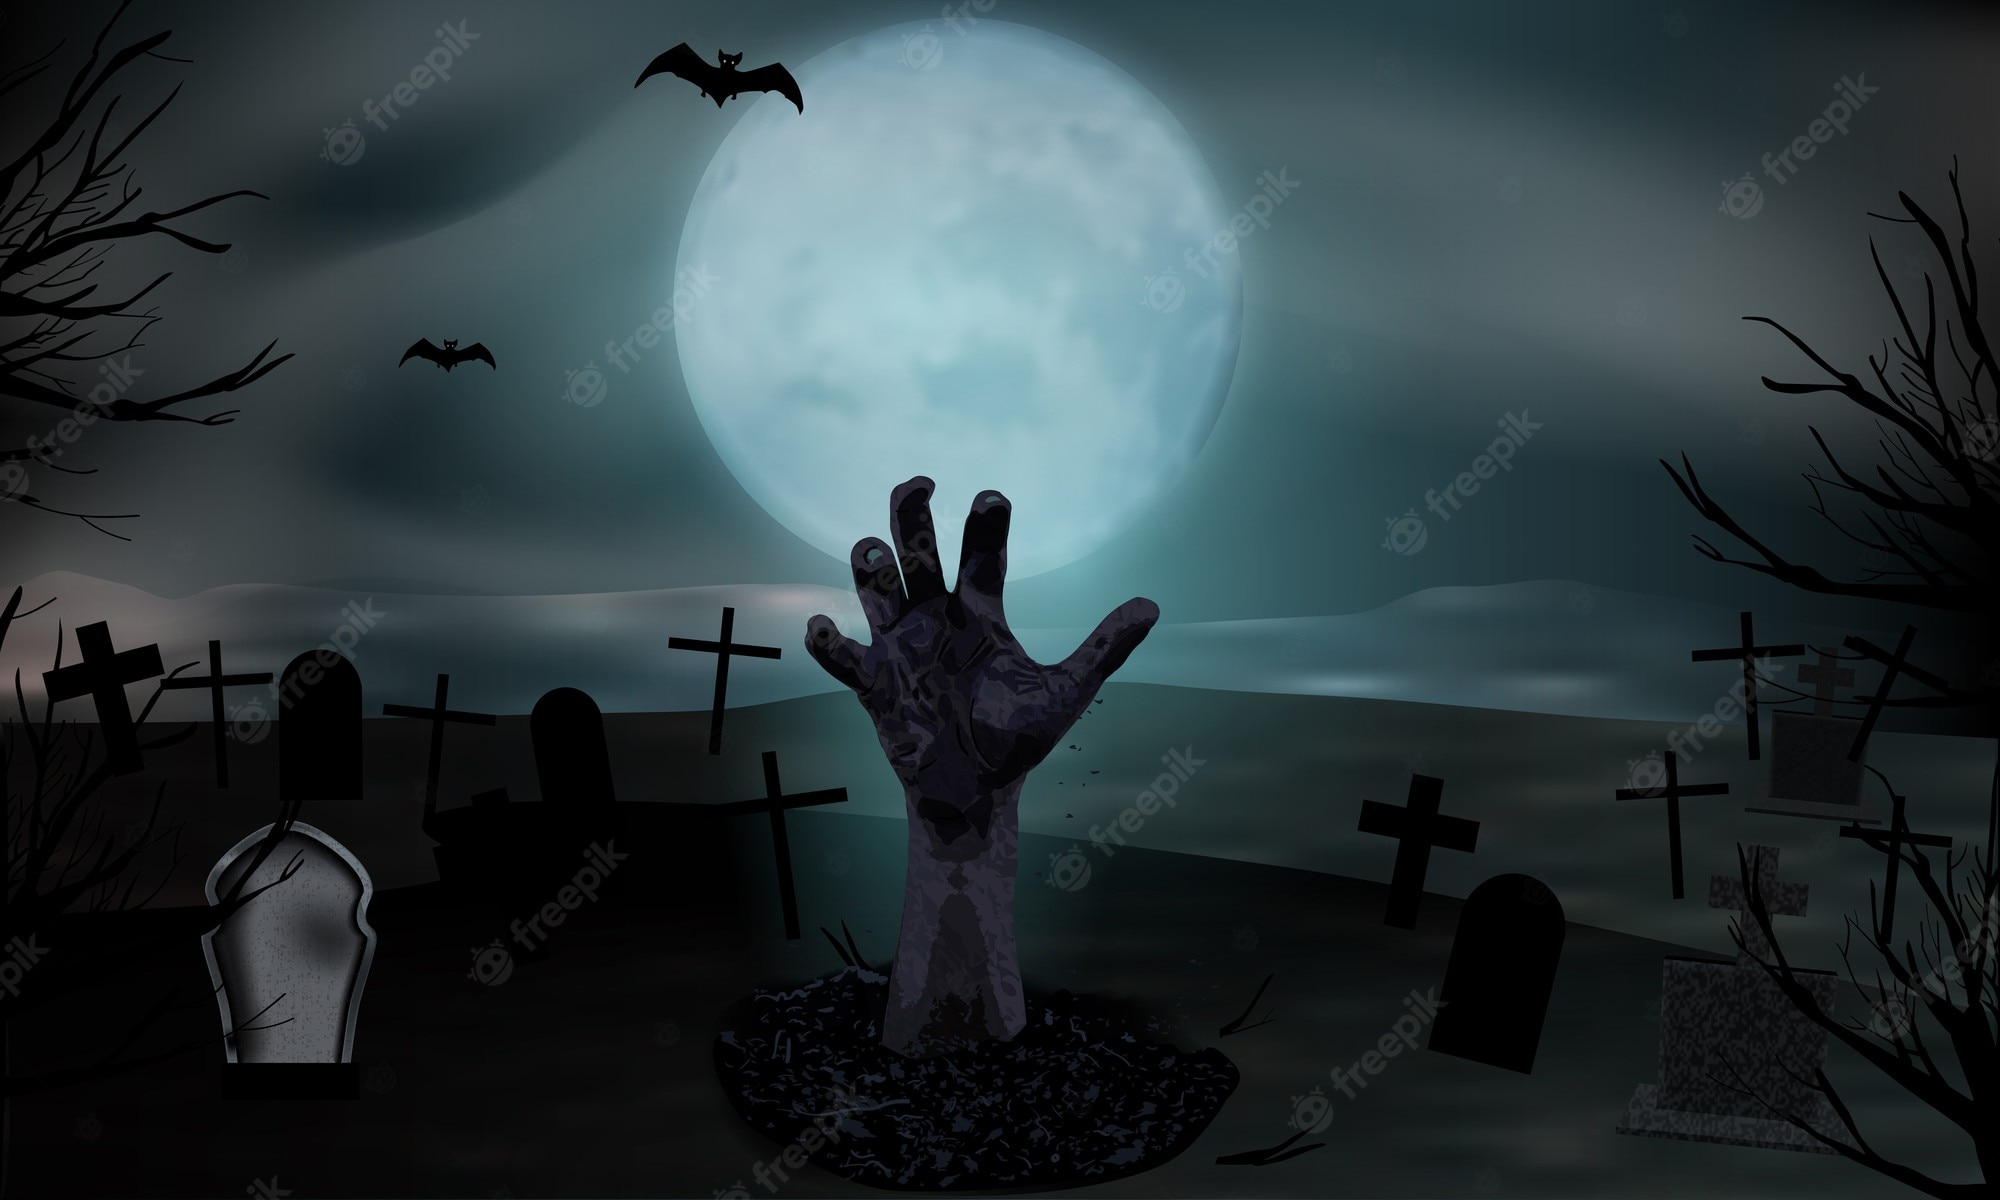 Zombie Hand From Cemetery
 Wallpapers